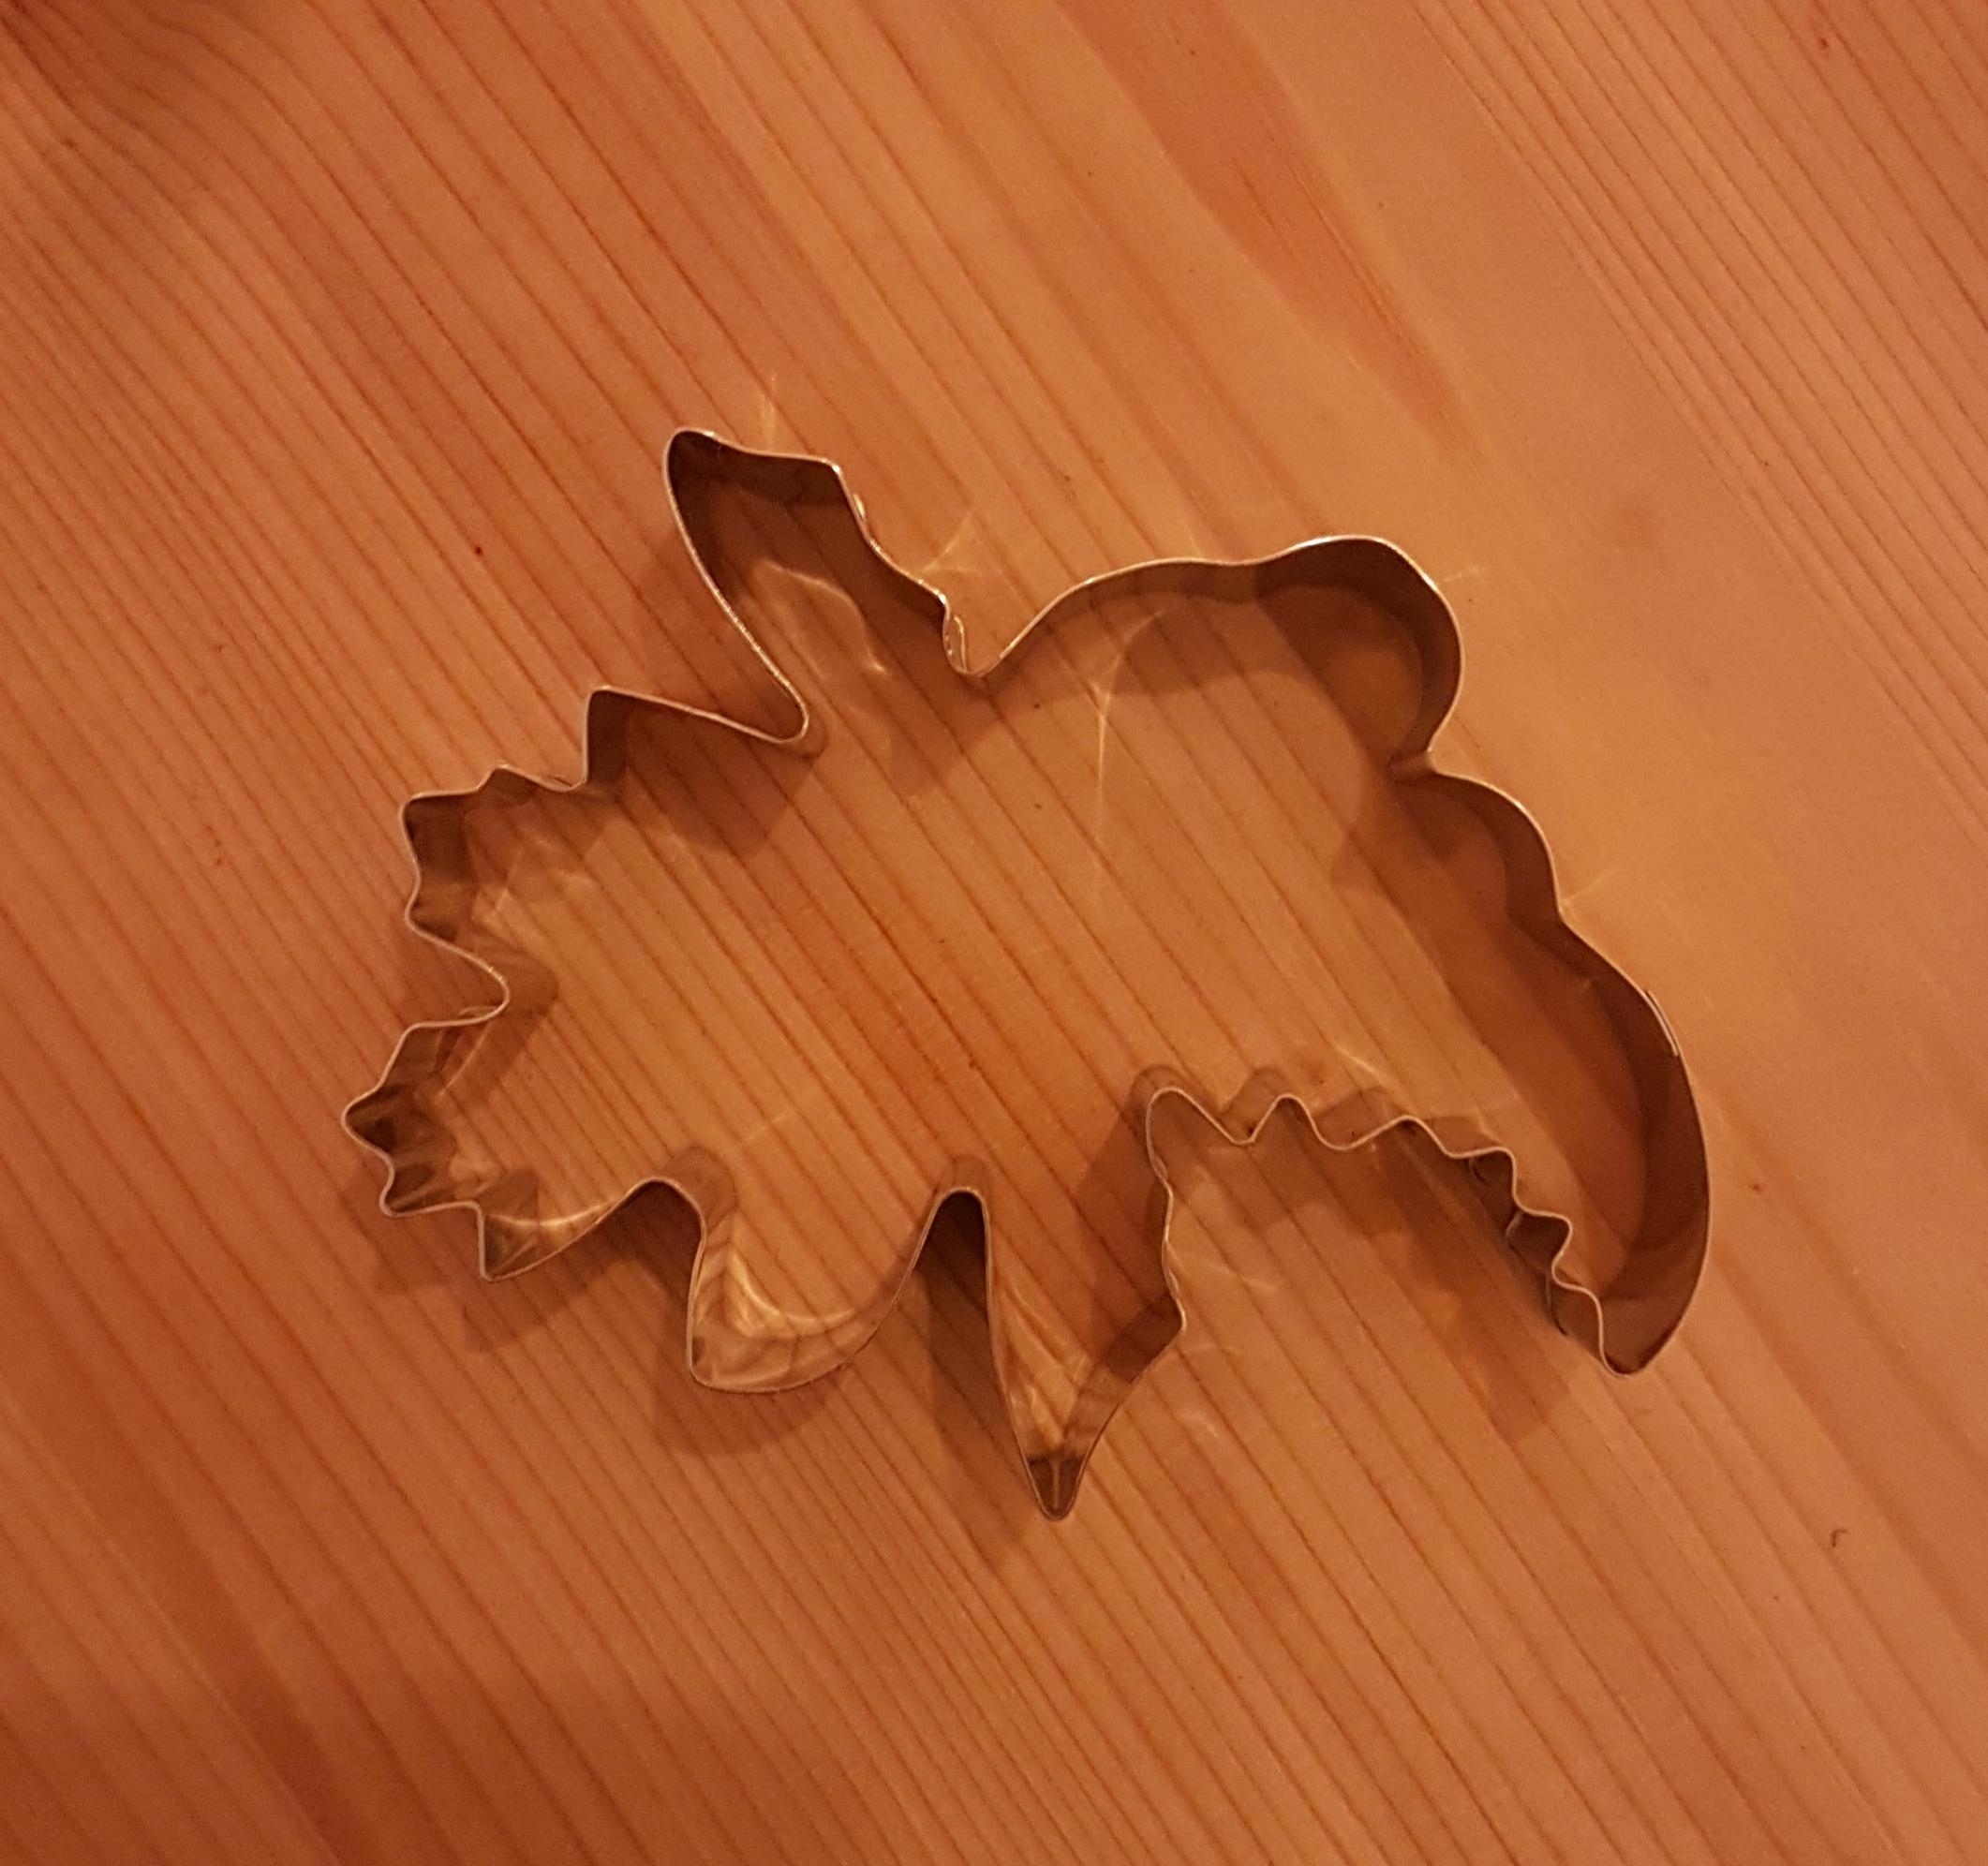 A cookie cutter that&#x27;s difficult to identify but could be an amoeba